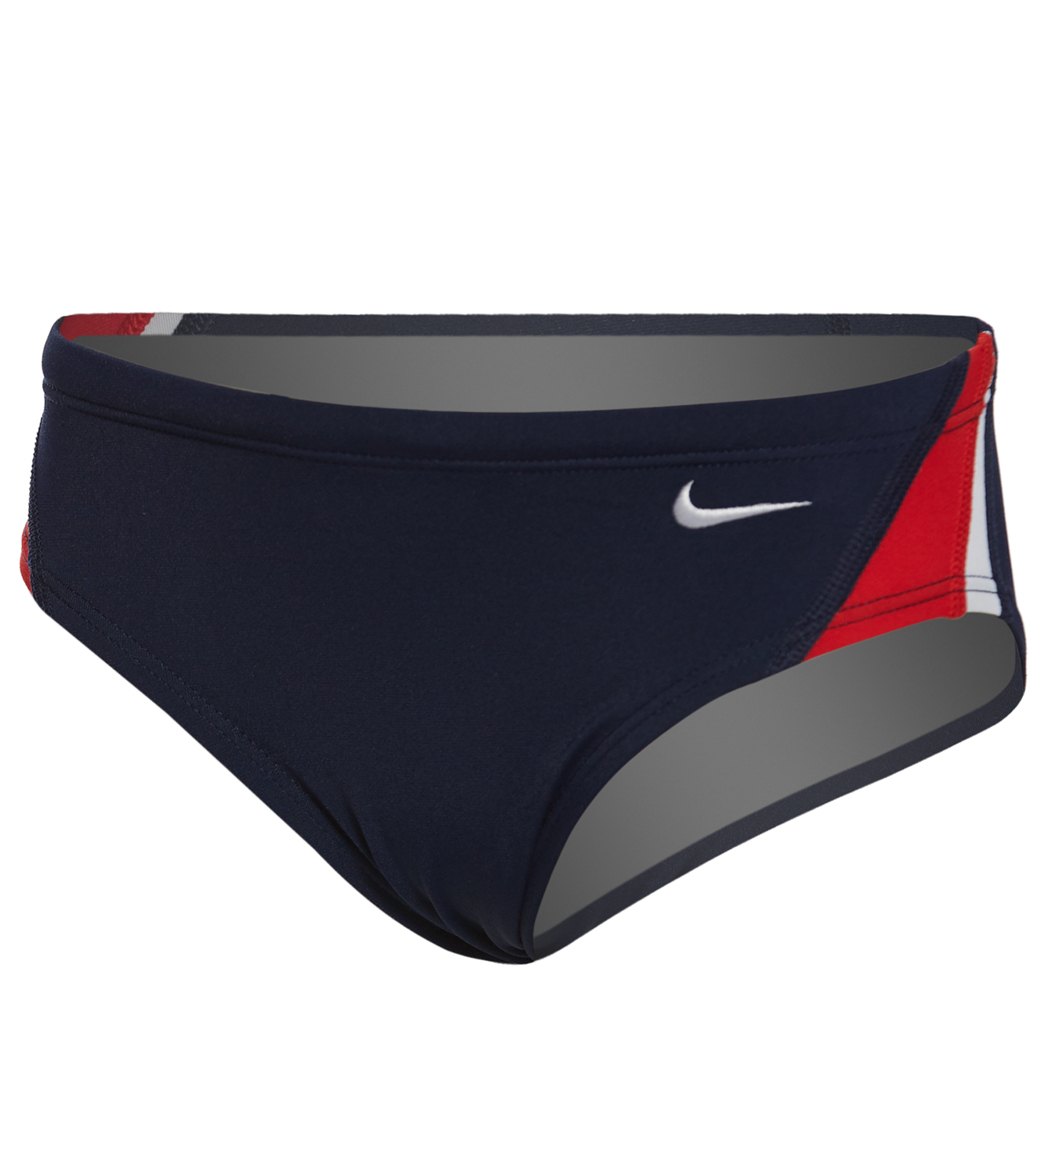 Nike Boys' Color Surge Brief Swimsuit - Red/Navy 24 Polyester/Pbt - Swimoutlet.com